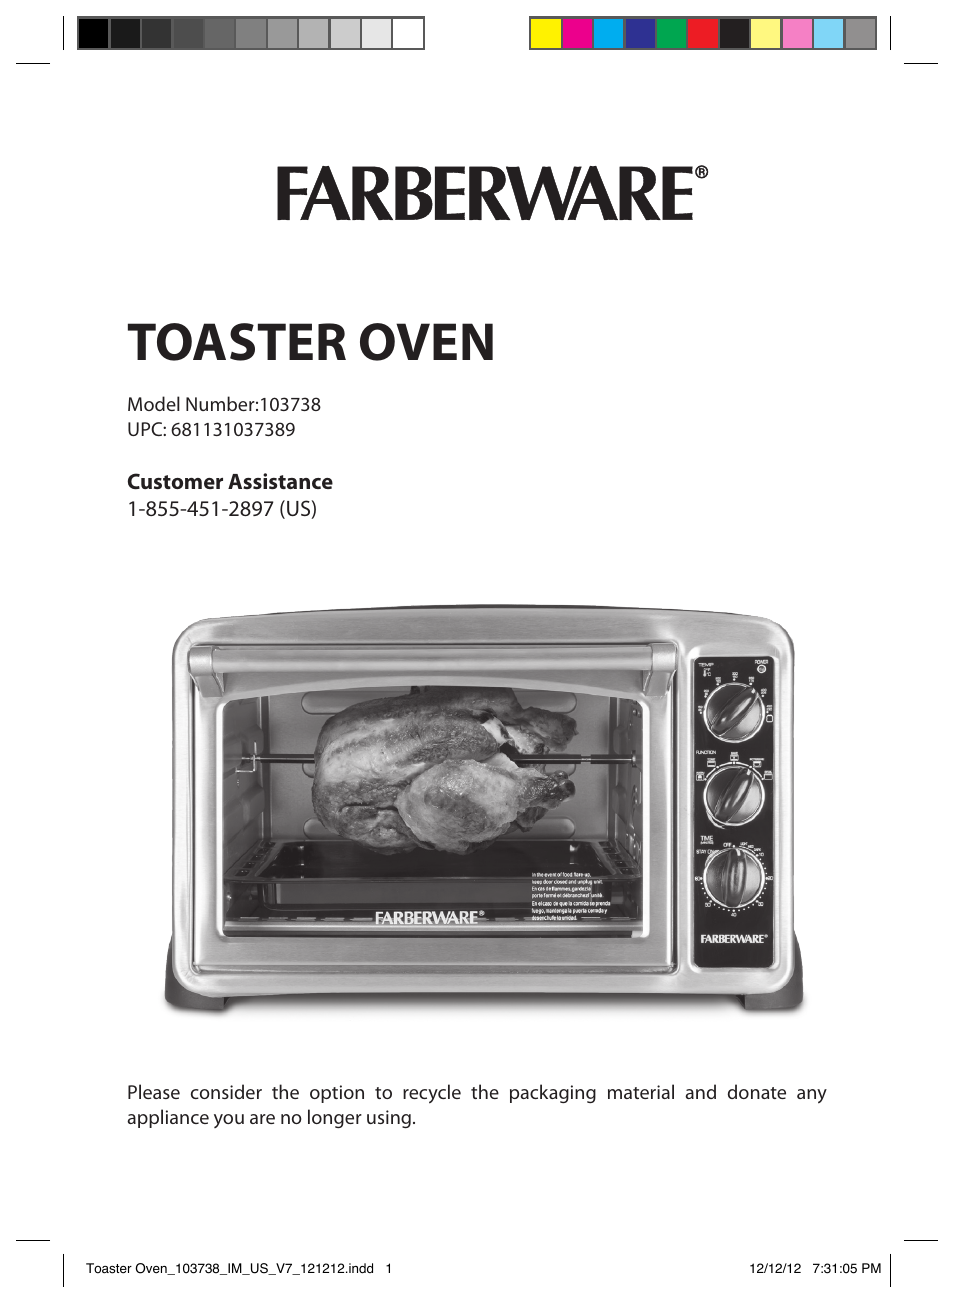 FARBERWARE 103718 Countertop Convection Oven User Manual | 18 pages